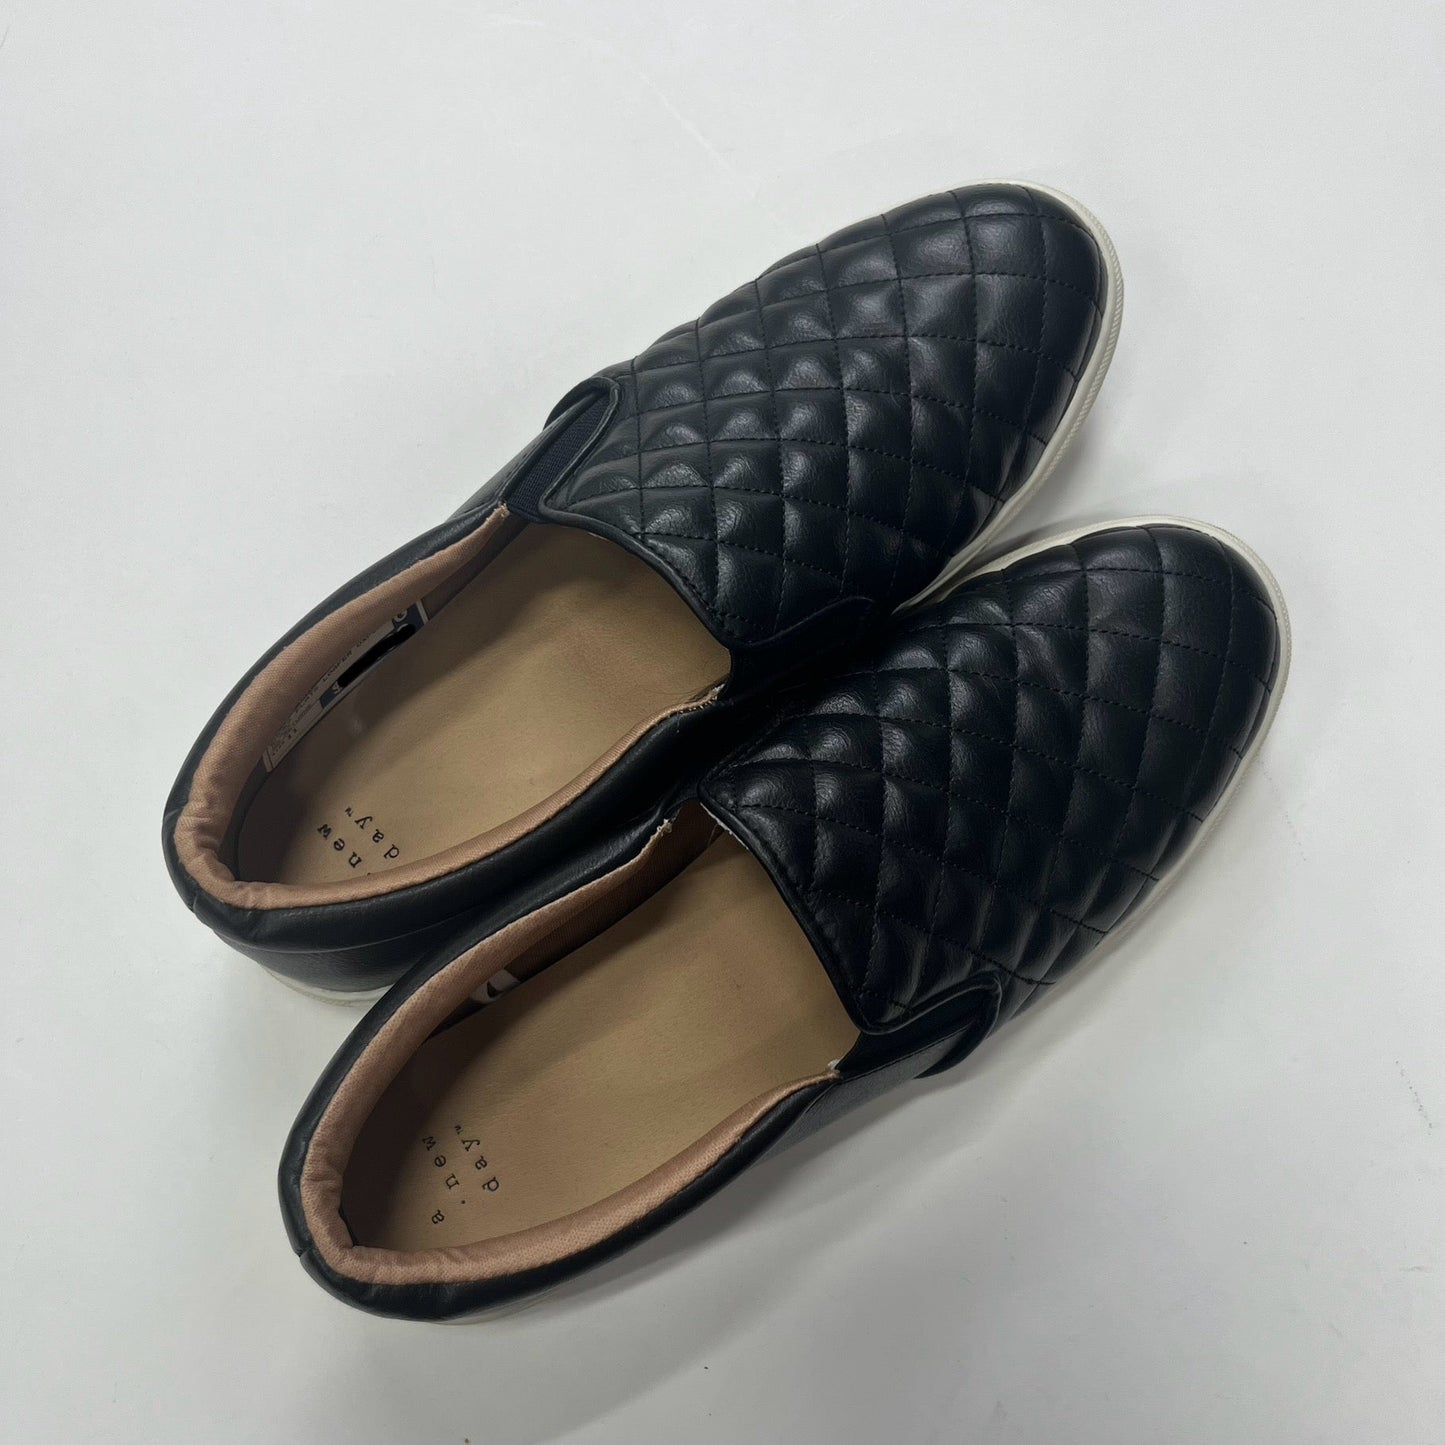 Black Shoes Flats Loafer Oxford A New Day, Size 11